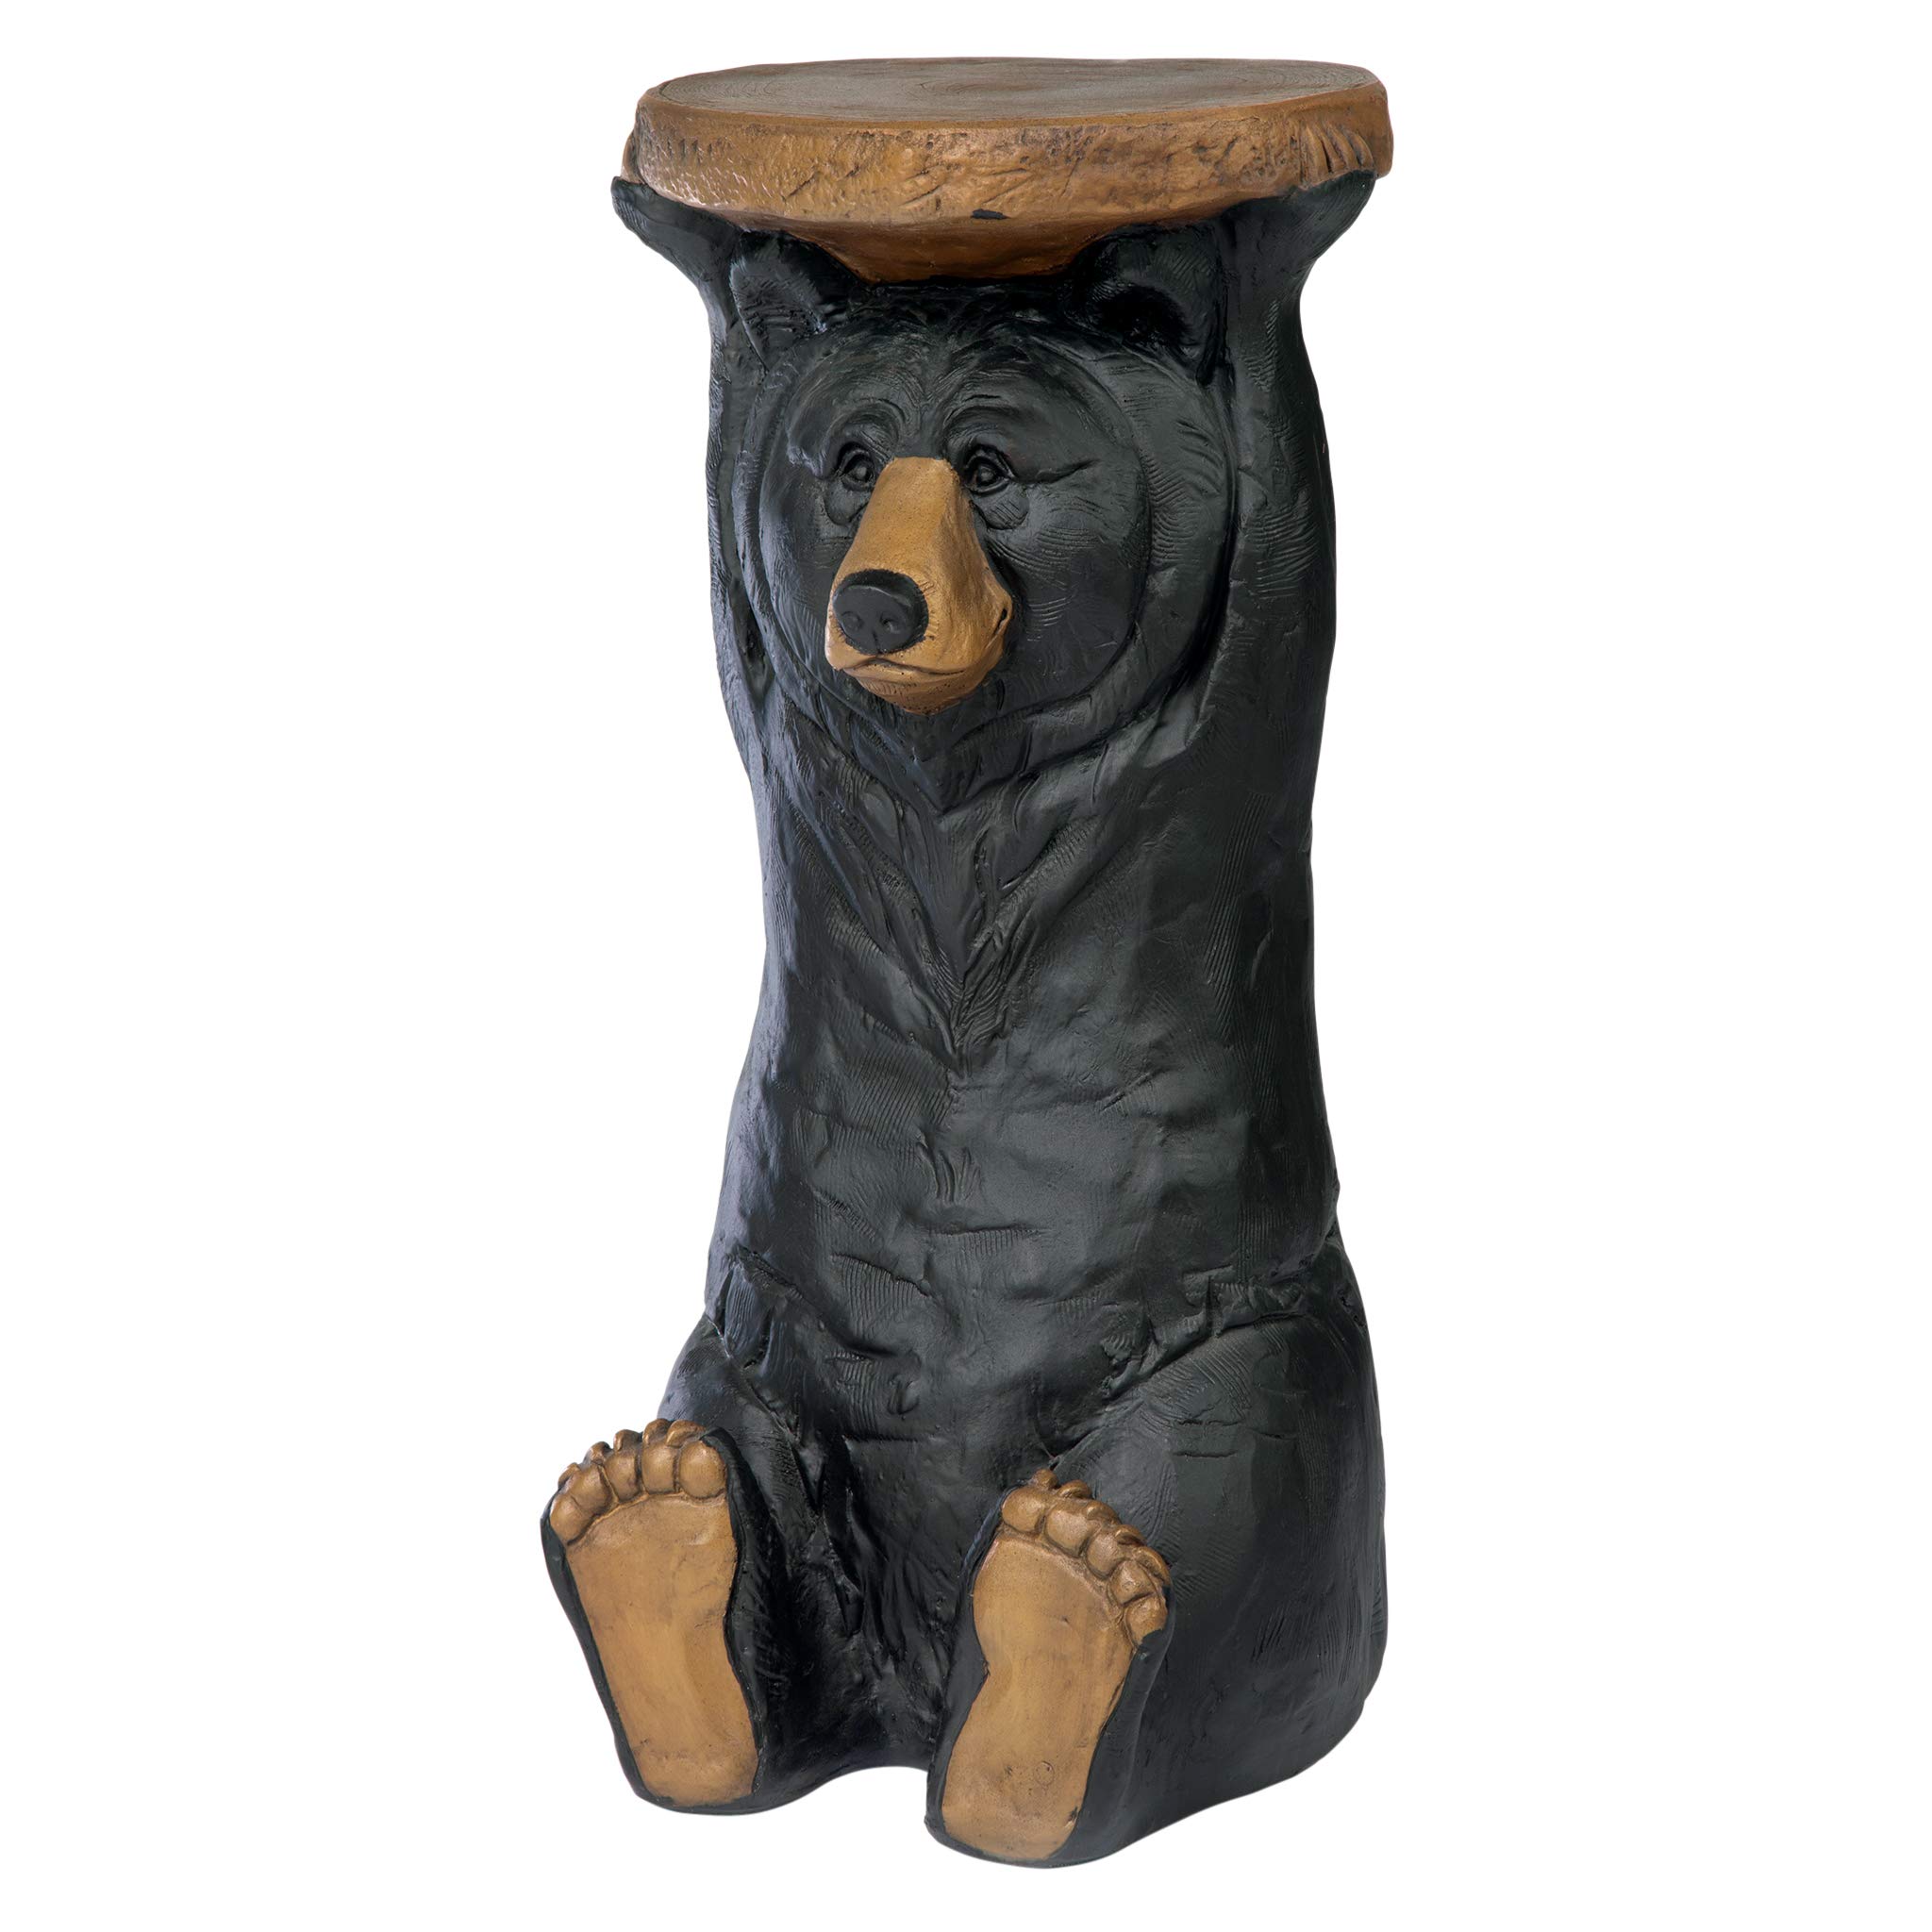 Design Toscano Black Forest Bear Pedestal Stand Cabin Decor, 11 Inches Wide, 11 Inches Deep, 24 Inches High, Handcast Polyresin, Full Color Finish